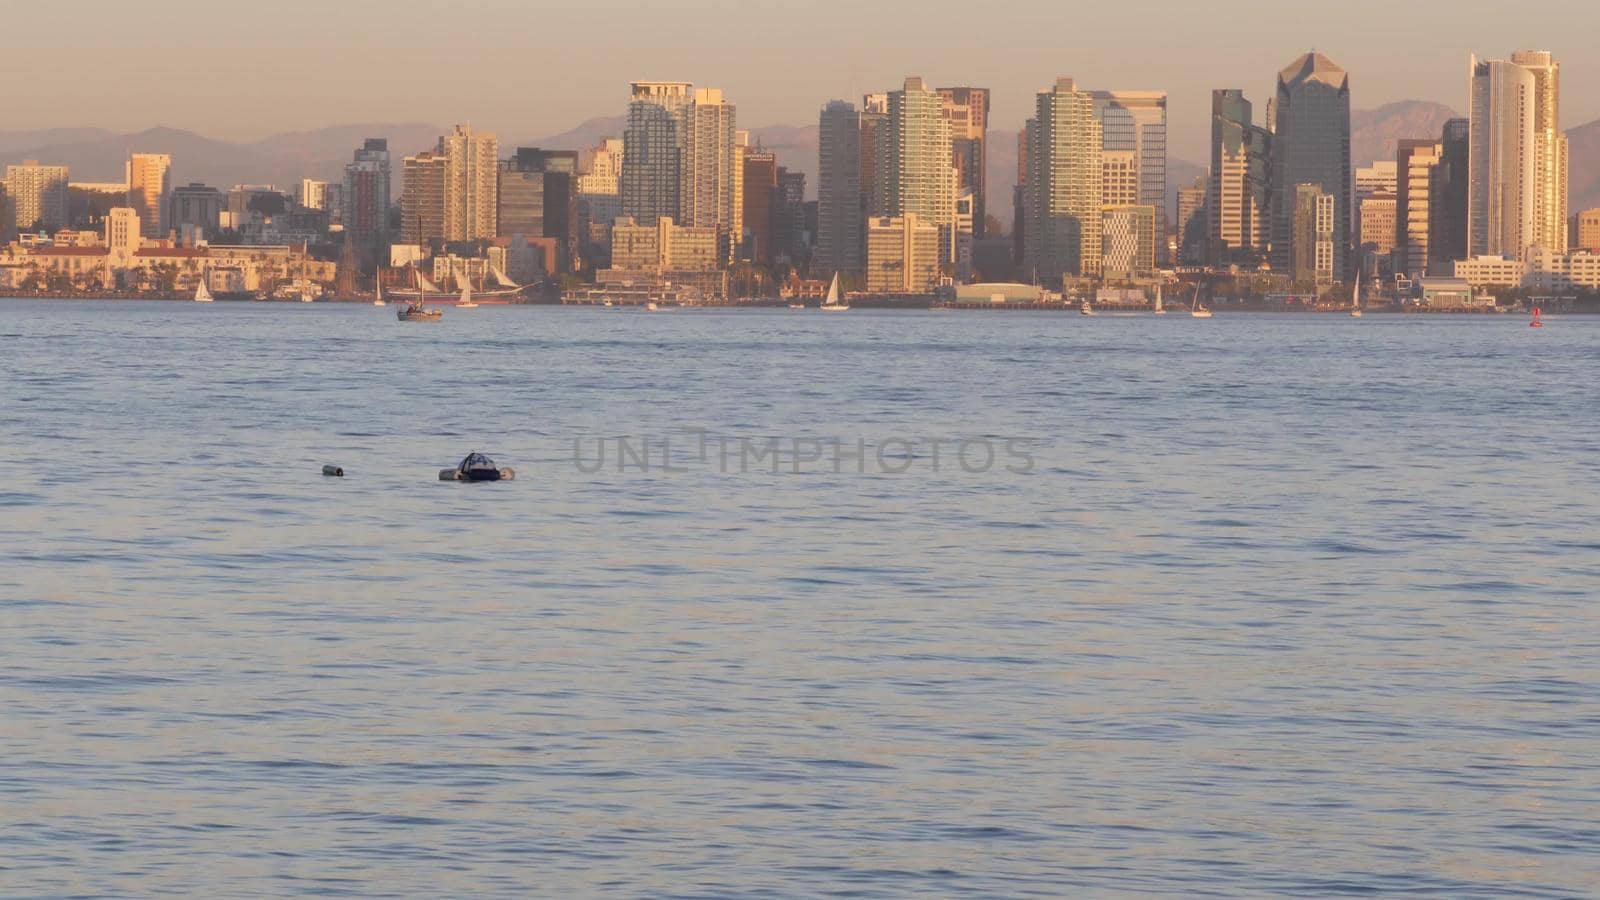 Downtown city skyline at sunset, San Diego cityscape, California coast USA. Highrise skyscrapers by bay, waterfront promenade. Urban architecture by harbor. Seamless looped cinemagraph. Shelter island